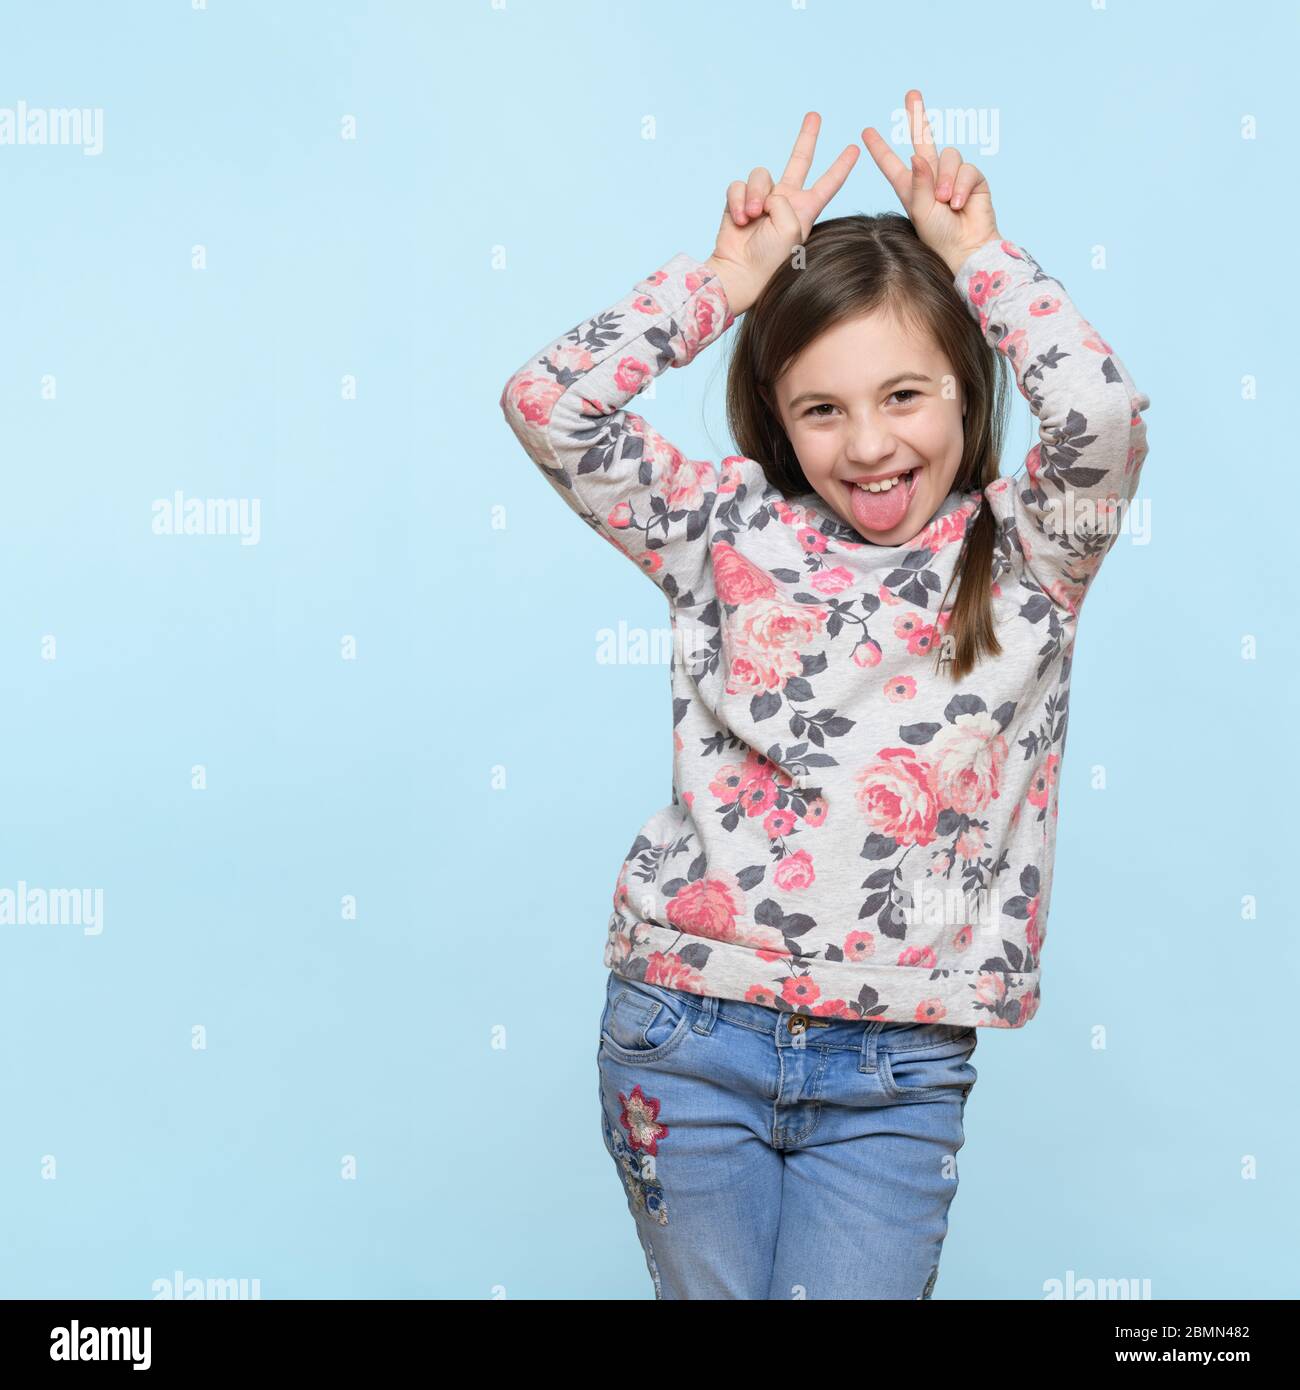 Studio shot of an expressive cute child holding fingers behind head like bunny ears or horns, looking at camera and smiling. Lifestyle and beautiful p Stock Photo